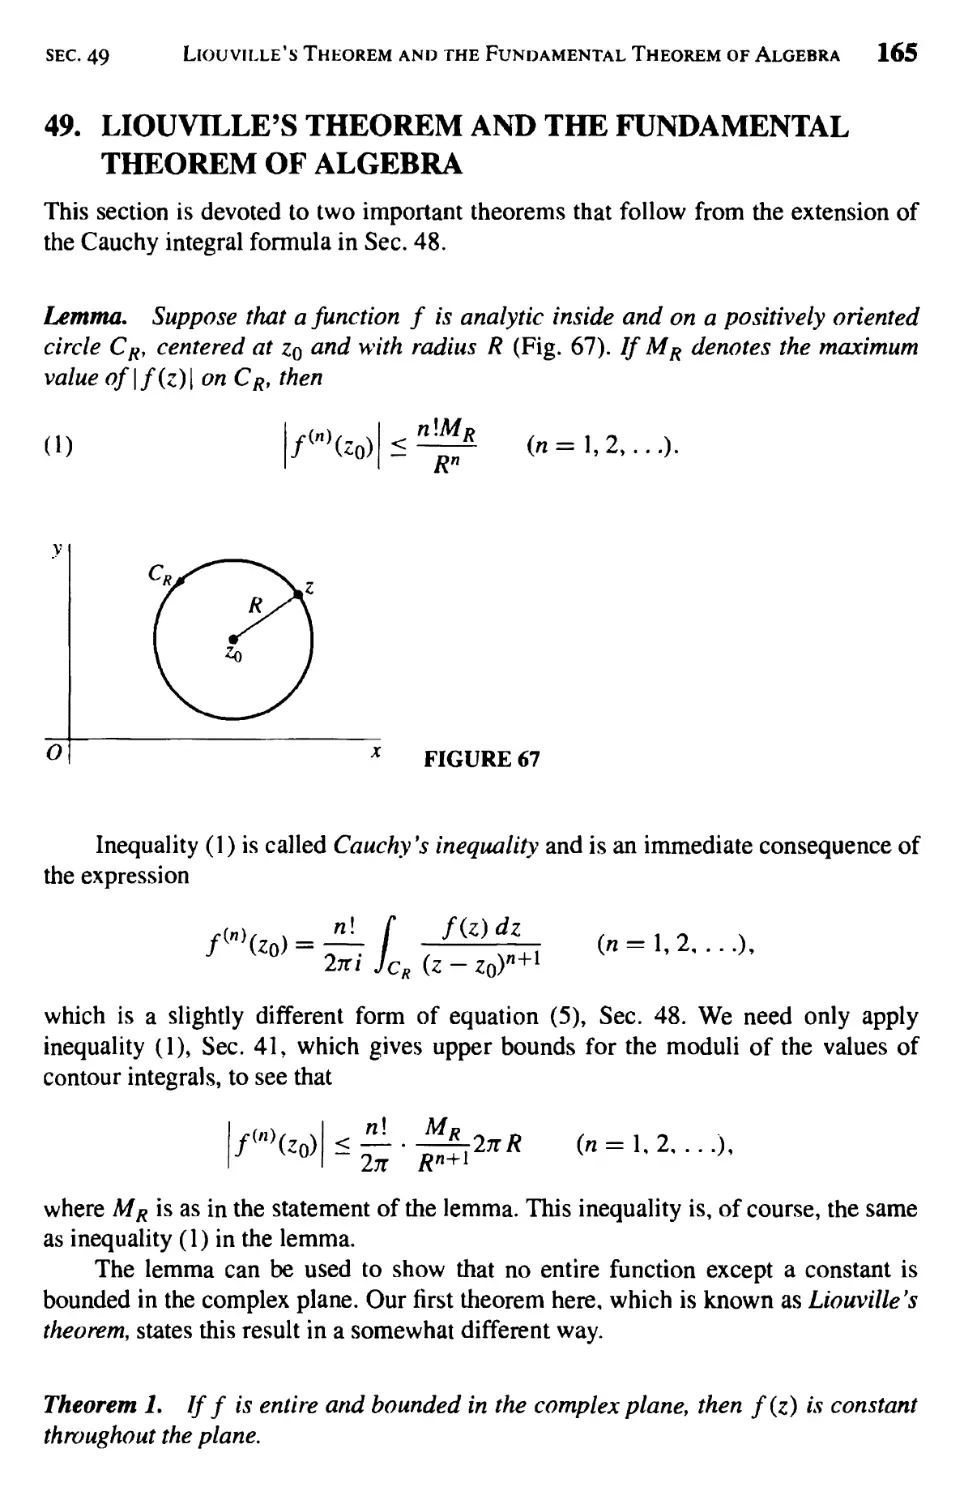 Liouville's Theorem and the Fundamental Theorem of Algebra